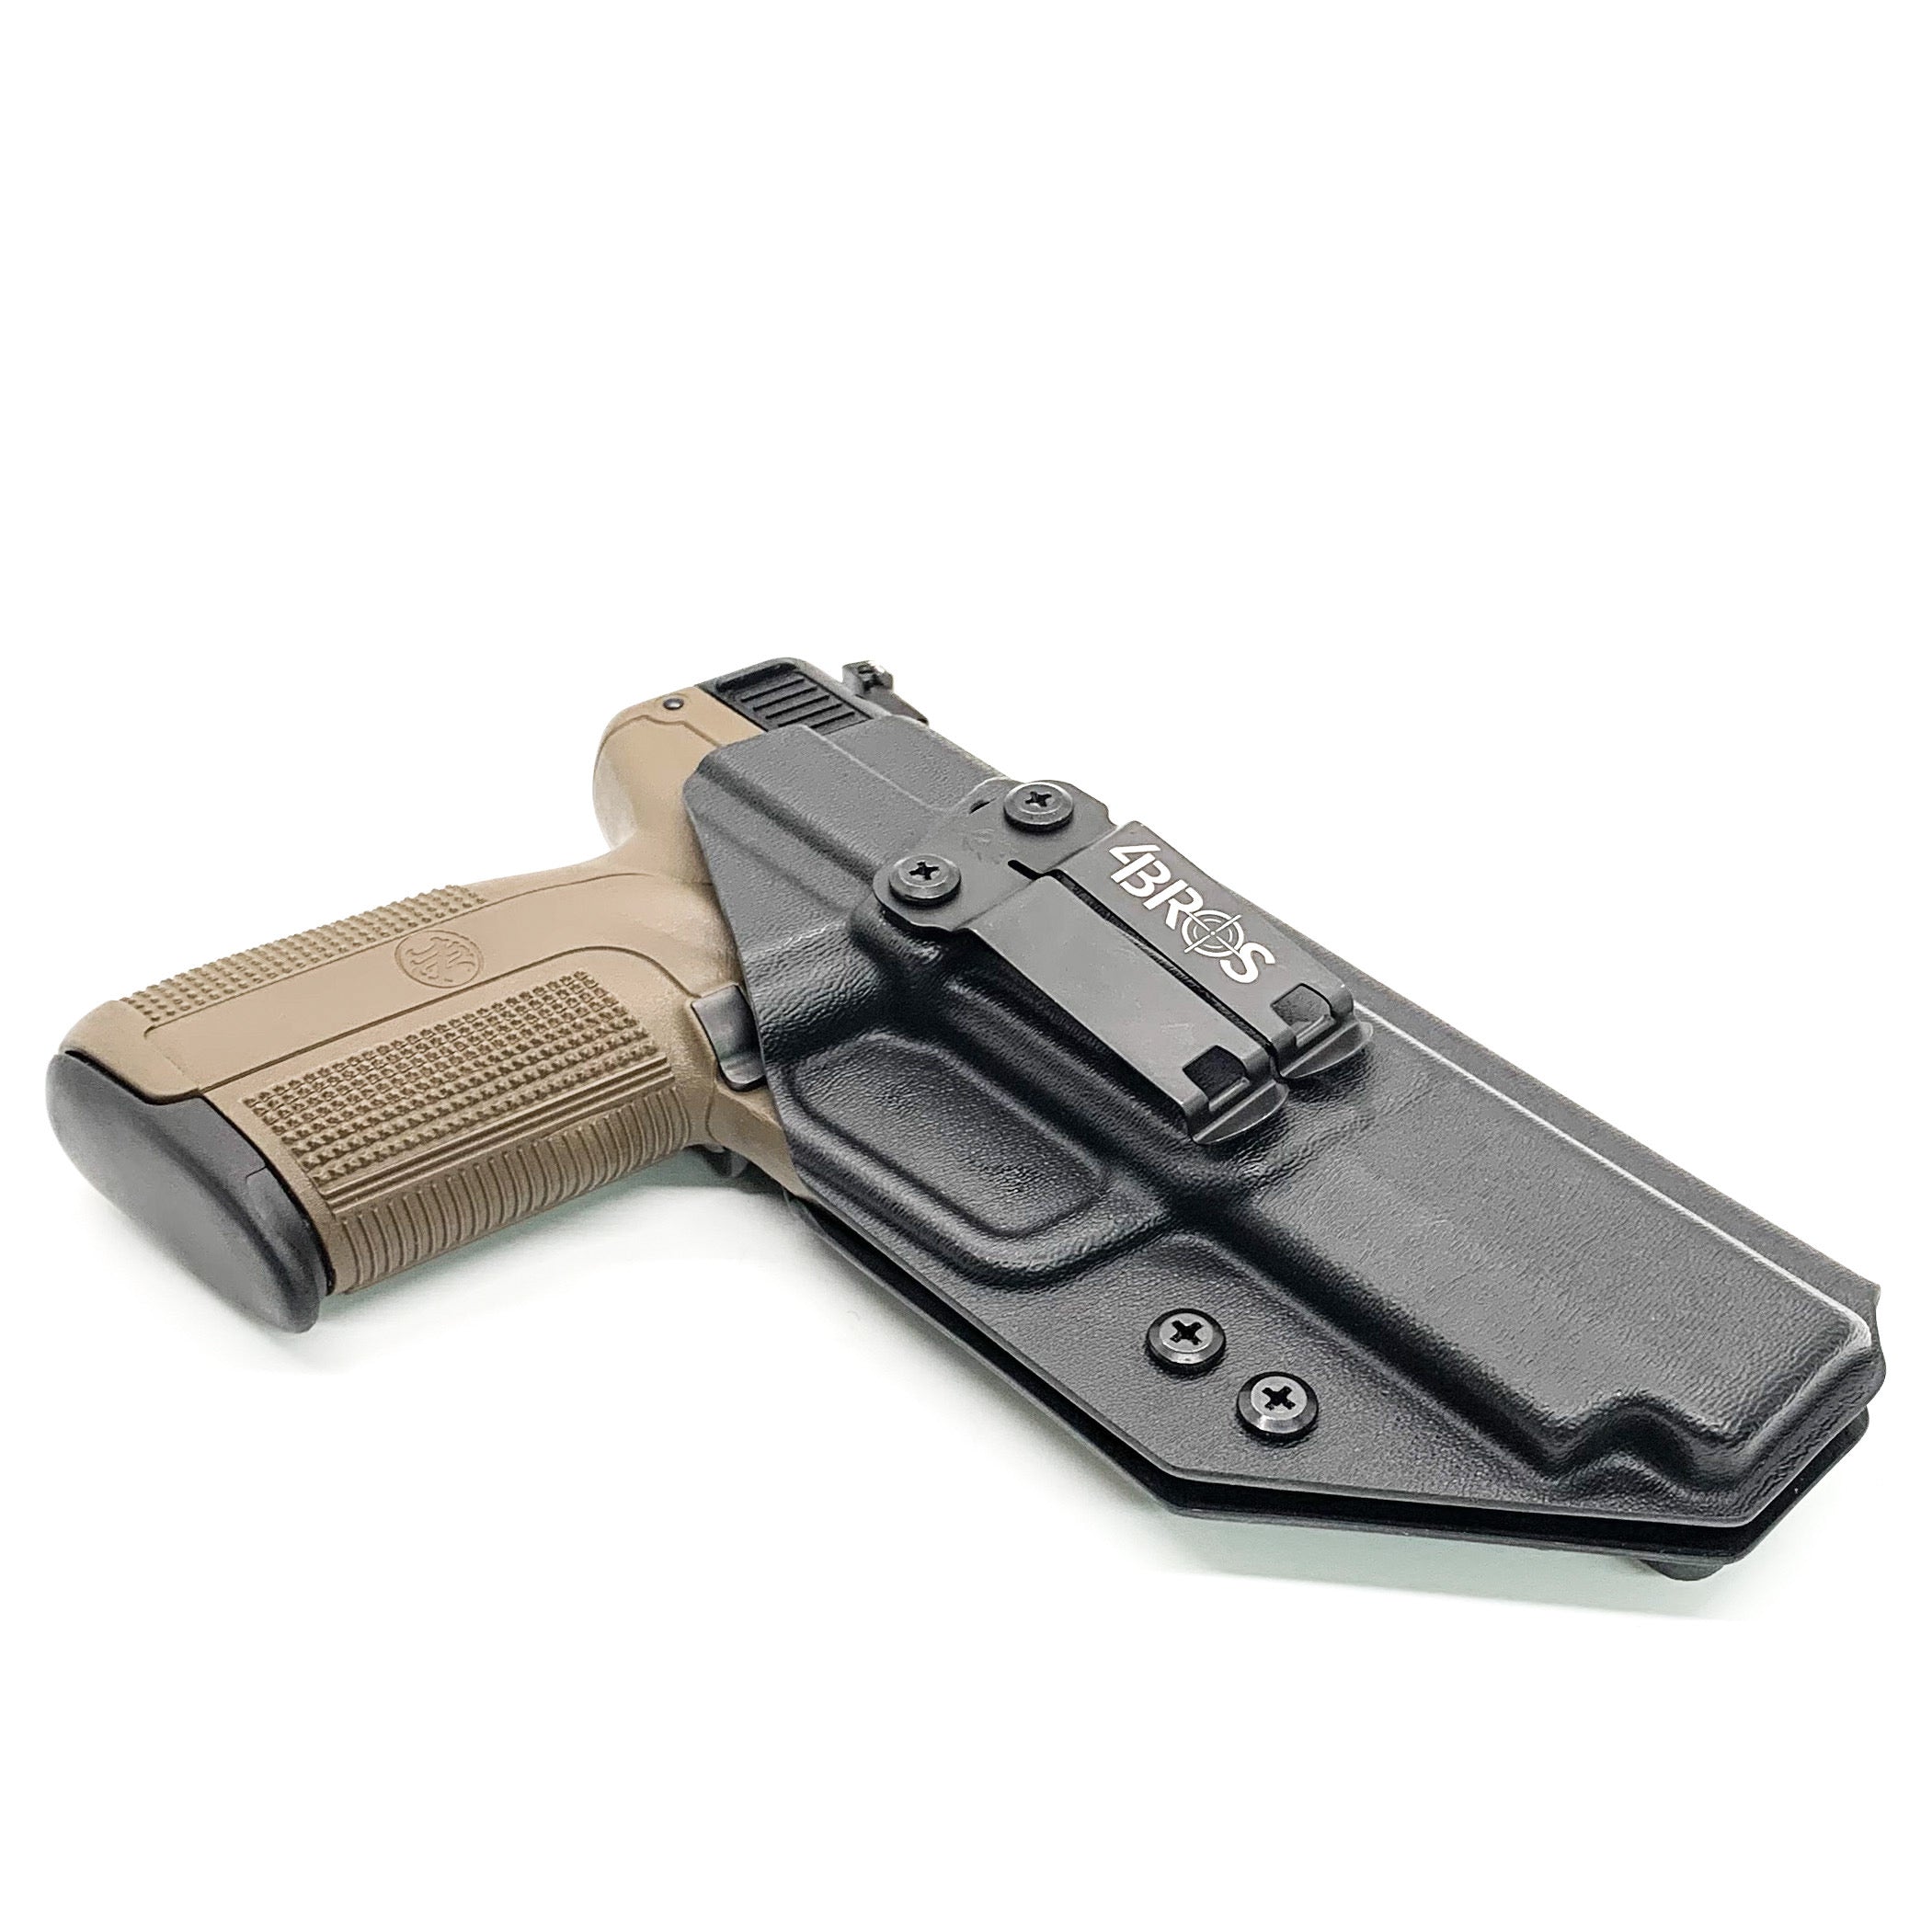 For the Best Inside Waistband Holster IWB designed to fit the FN America Five-seveN pistol, shop Four Brothers Holsters.  Featuring adjustable retention and cant, this holster is formed from .080" thermoplastic for durability and comfort.  Optional Modwing reduces firearm printing Proudly Made in the USA 57 5.7 